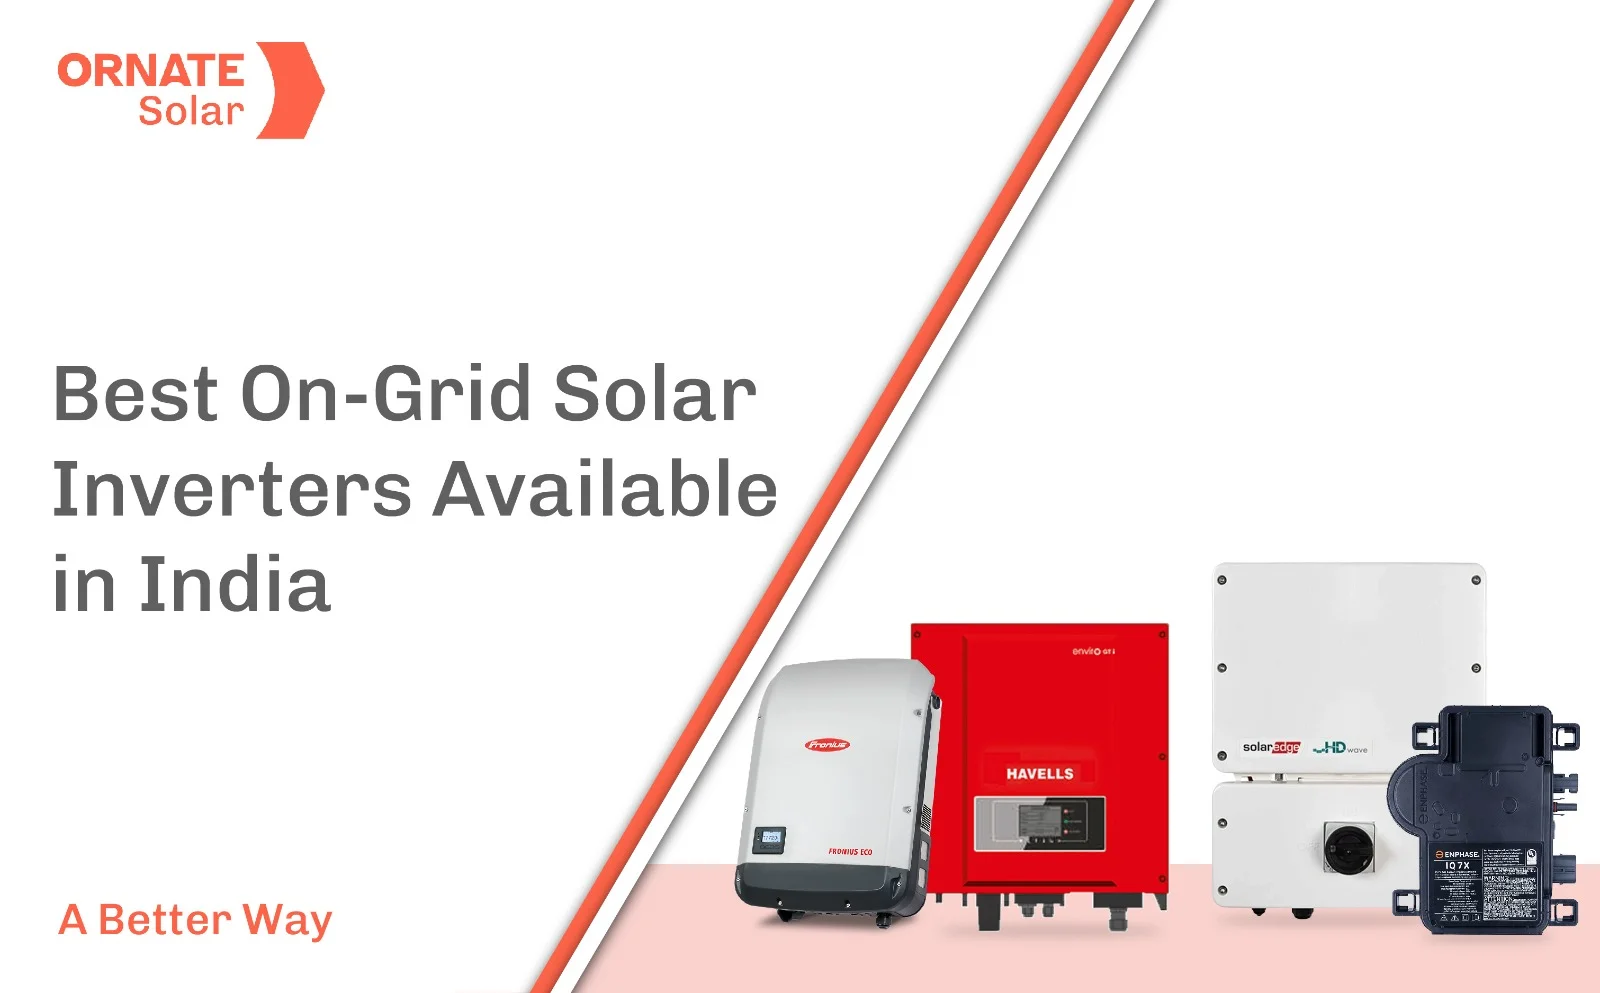 Buy Power-One Solar Inverter Online, Get Up-to 40% Off